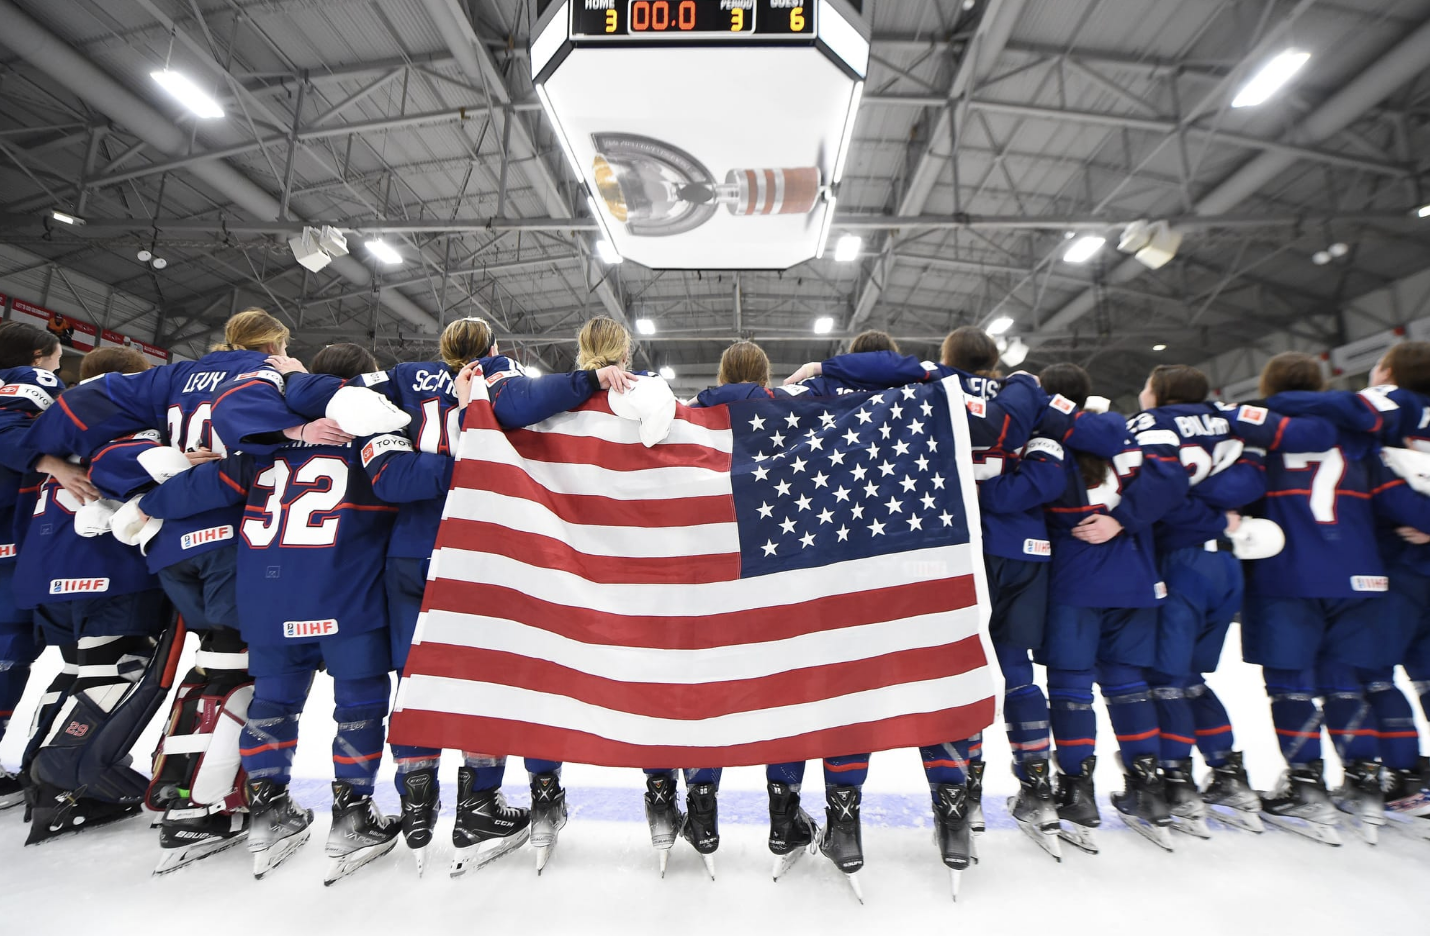 Team USA celebrates their gold medal win in the 2023 IIHF World Championship. They are arm-in-arm, and the American flag is draped across the backs of those in the middle.